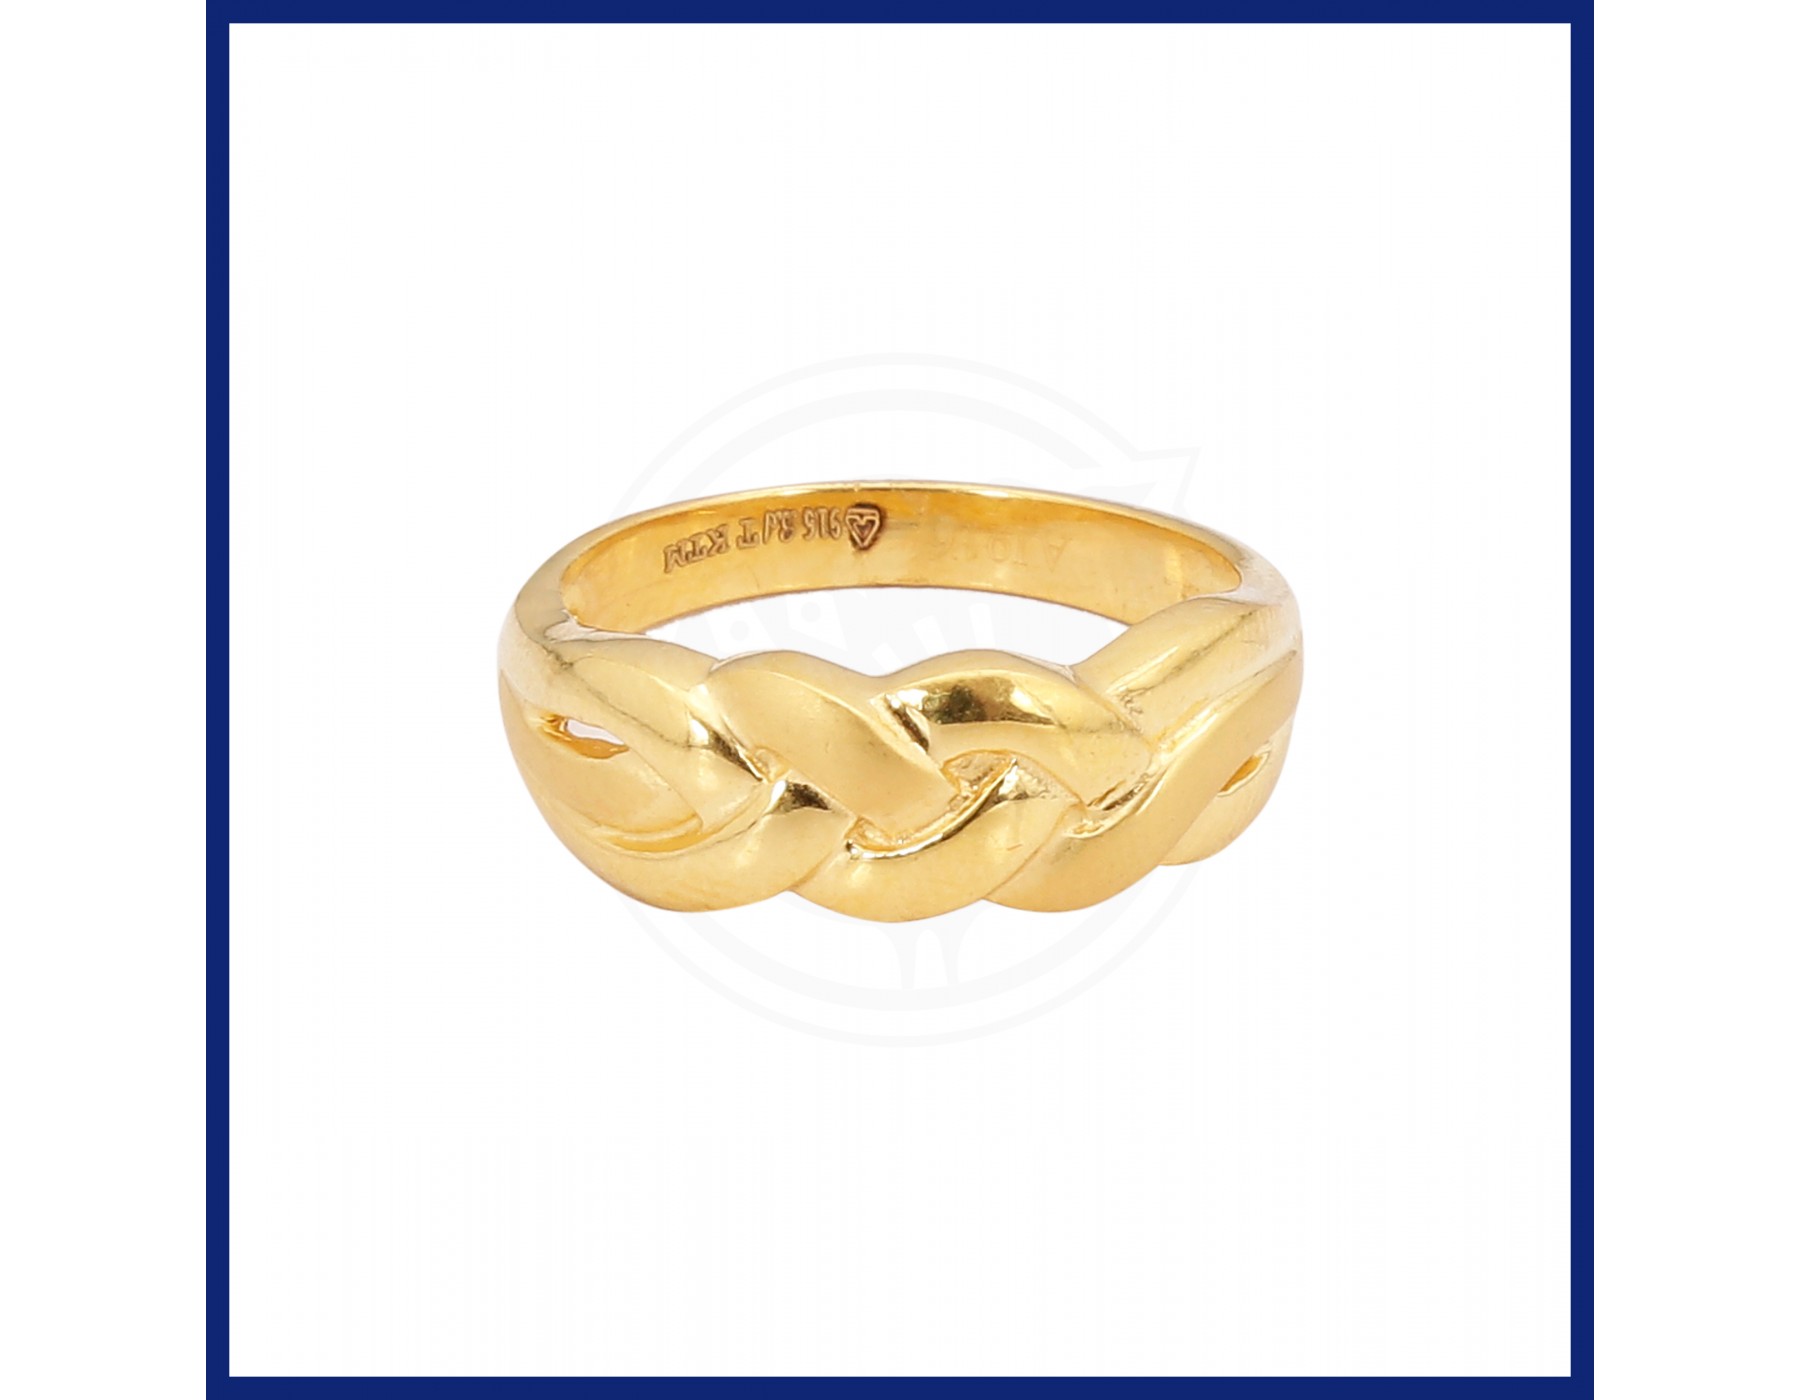 Casting Gents Gold Ring at Best Price in Coimbatore | MANISH JEWELLERY